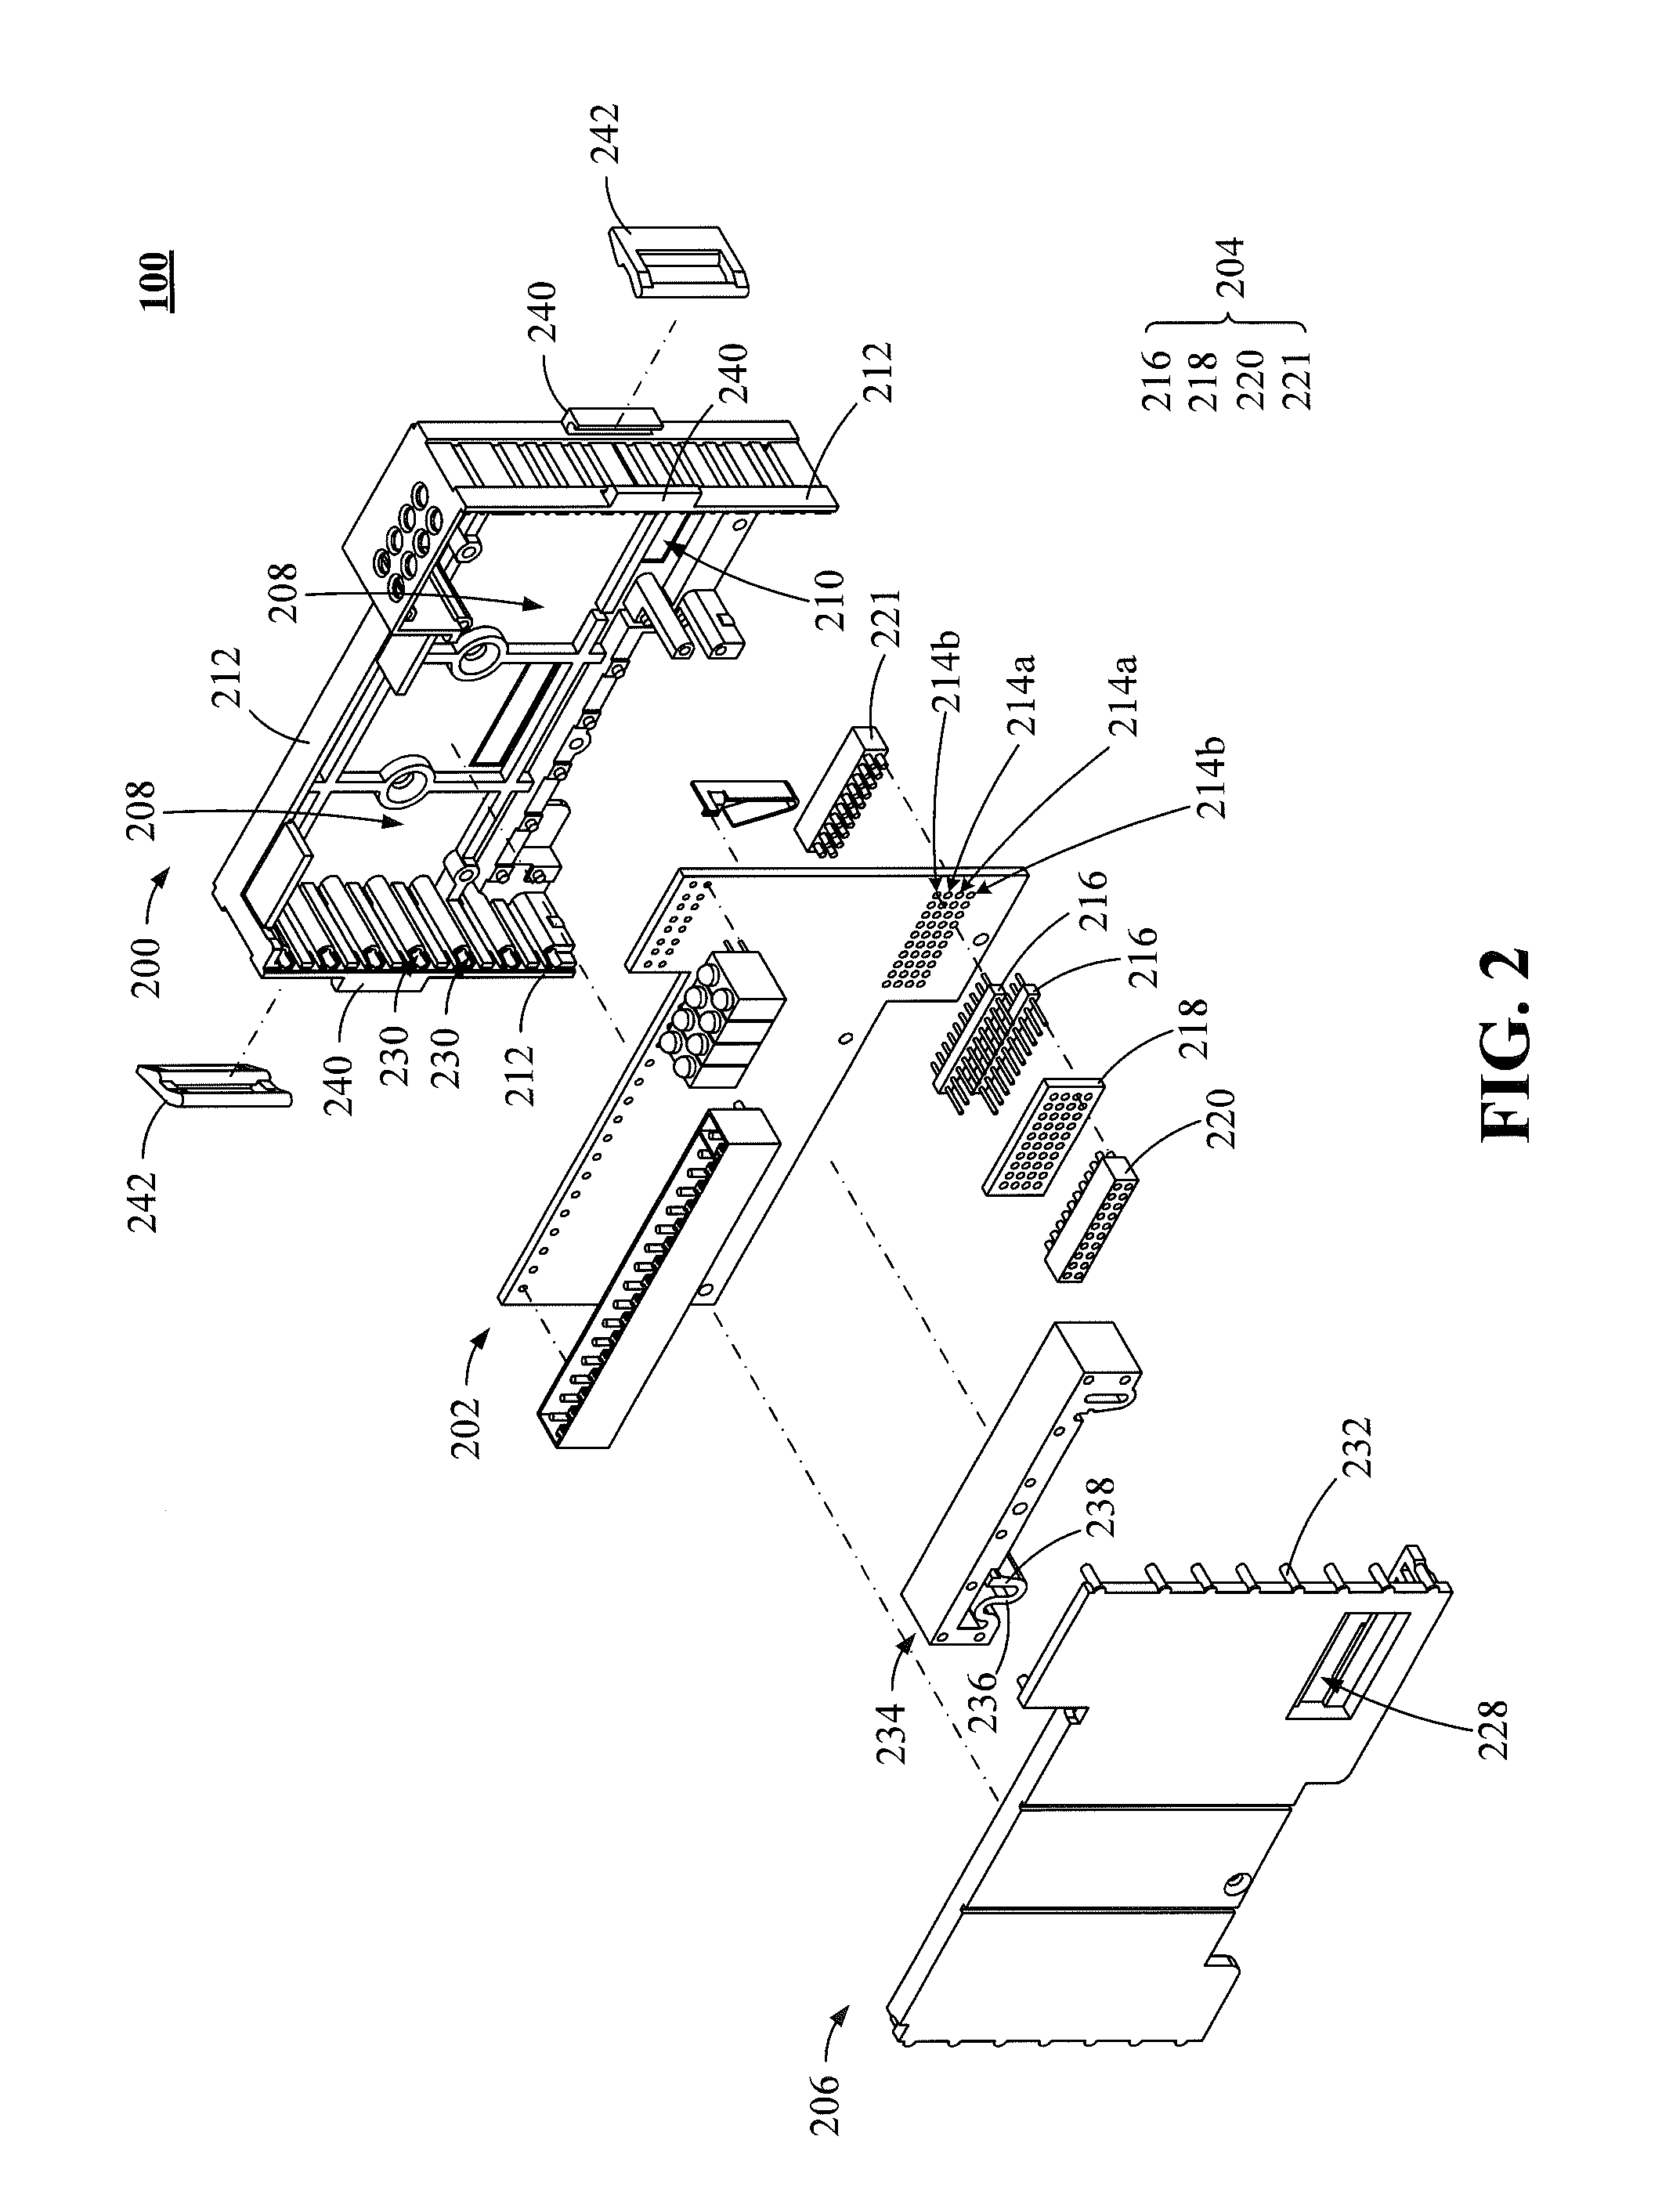 Communication structure with connecting assembly